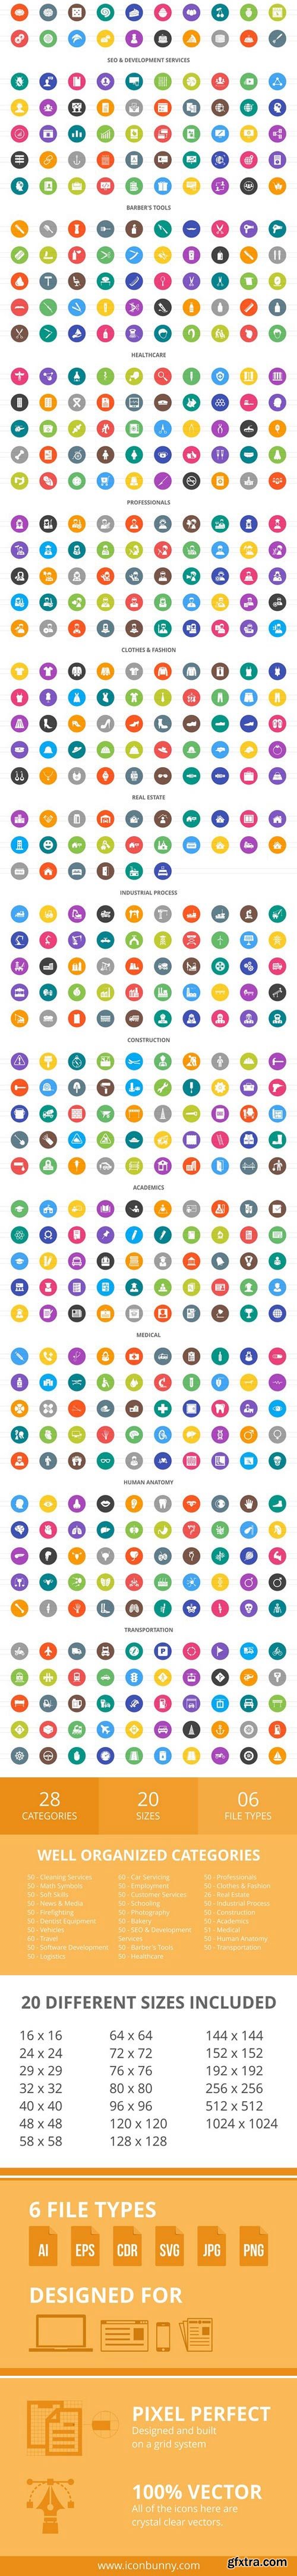 CM - 1396 Professions Filled Round Icons 2428144